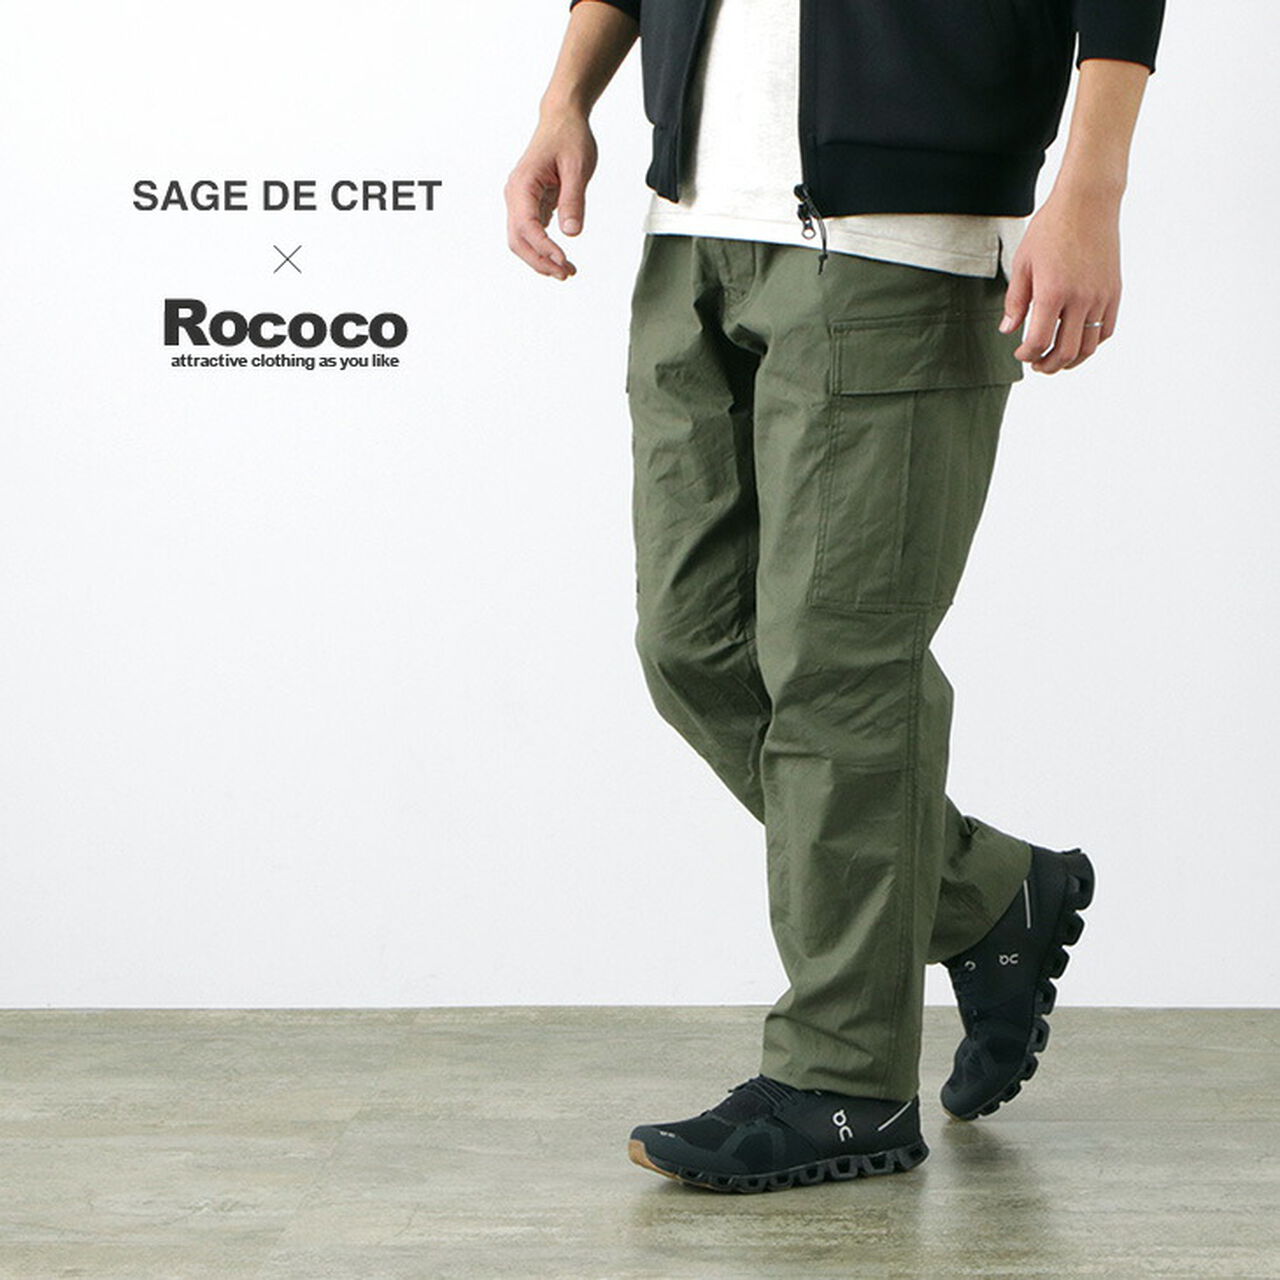 palm tyrant Go down SAGE DE CRET Tapered Cargo Pants/Ripstop Stretch